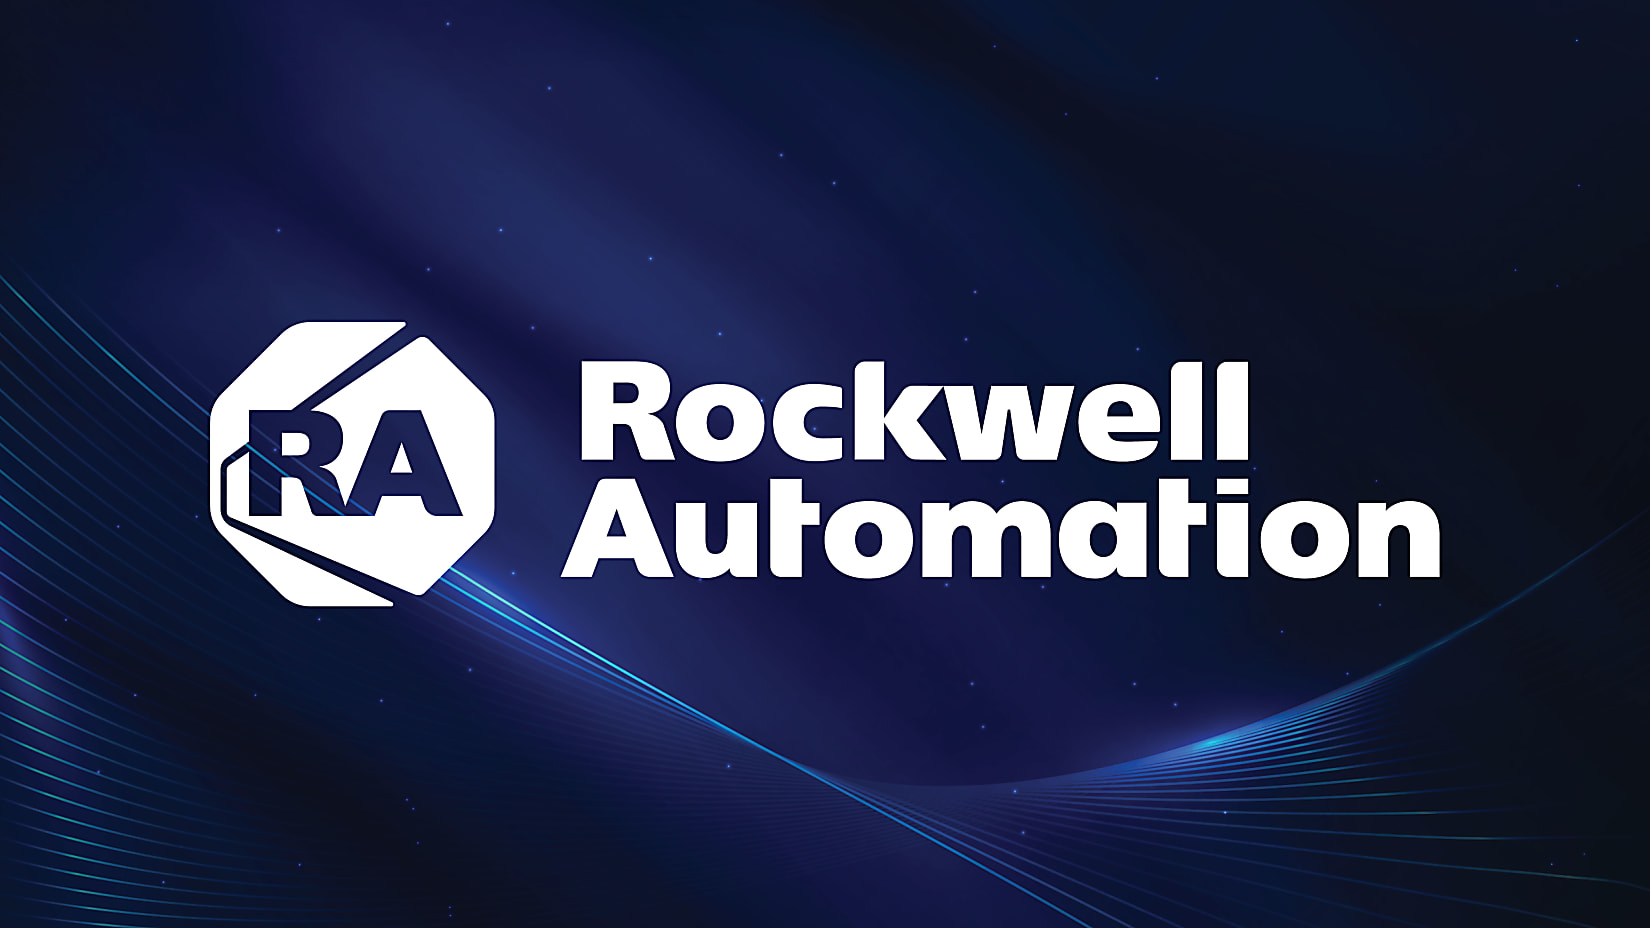 HMS-Rockwell-Automation